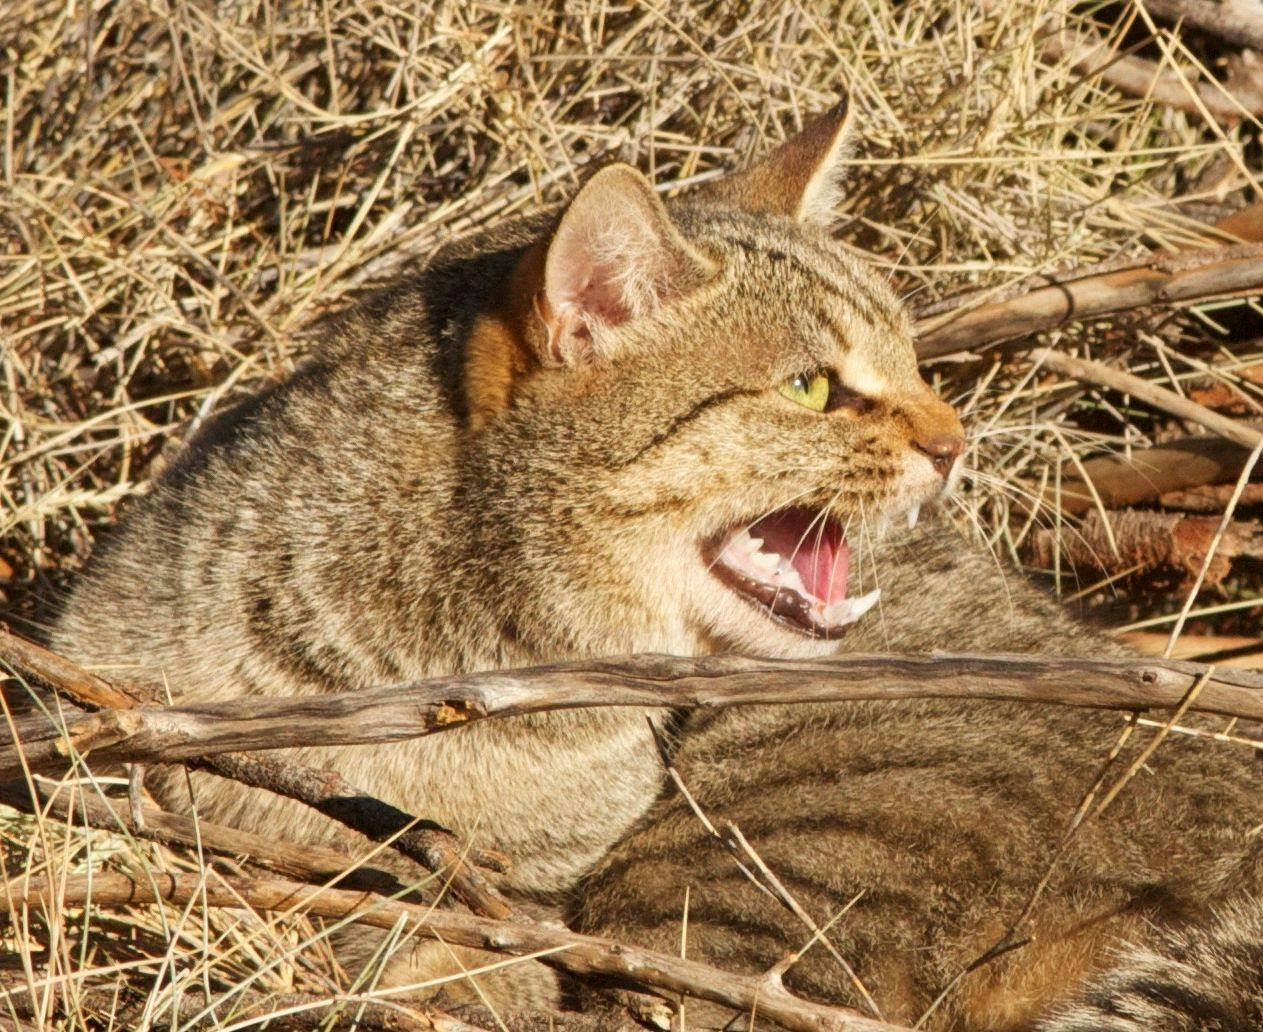 A feral cat (Photo courtesy of Judy Dunlop).